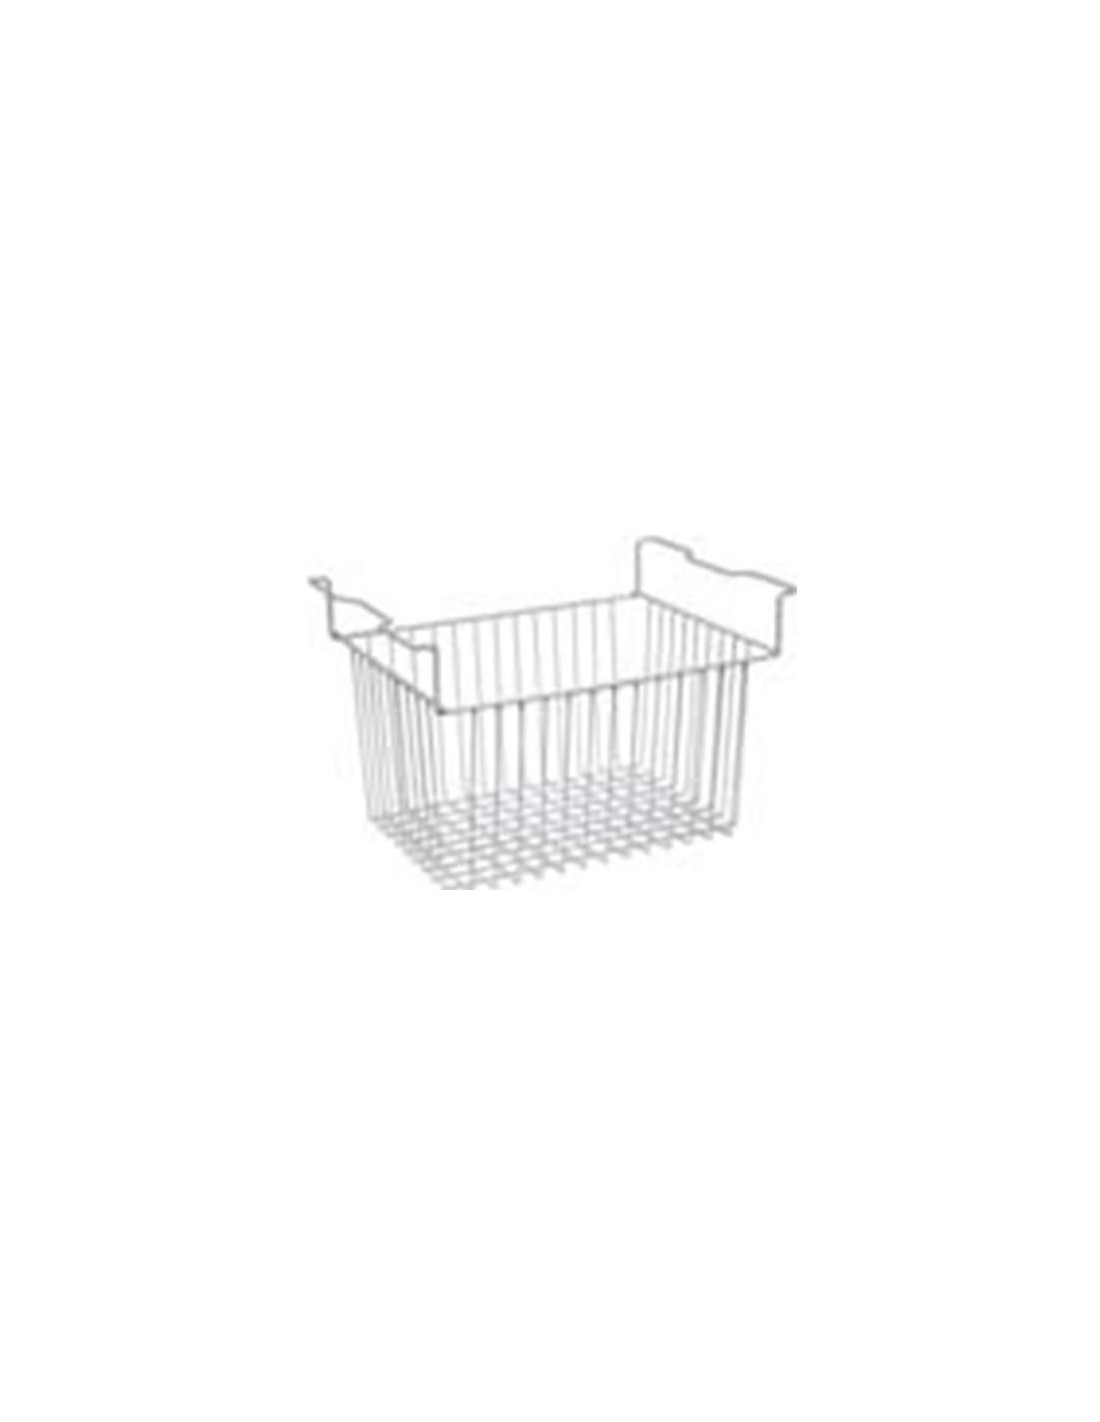 Frozen food and packaged ice cream basket - Cm 22 x 55.5 x 39 h